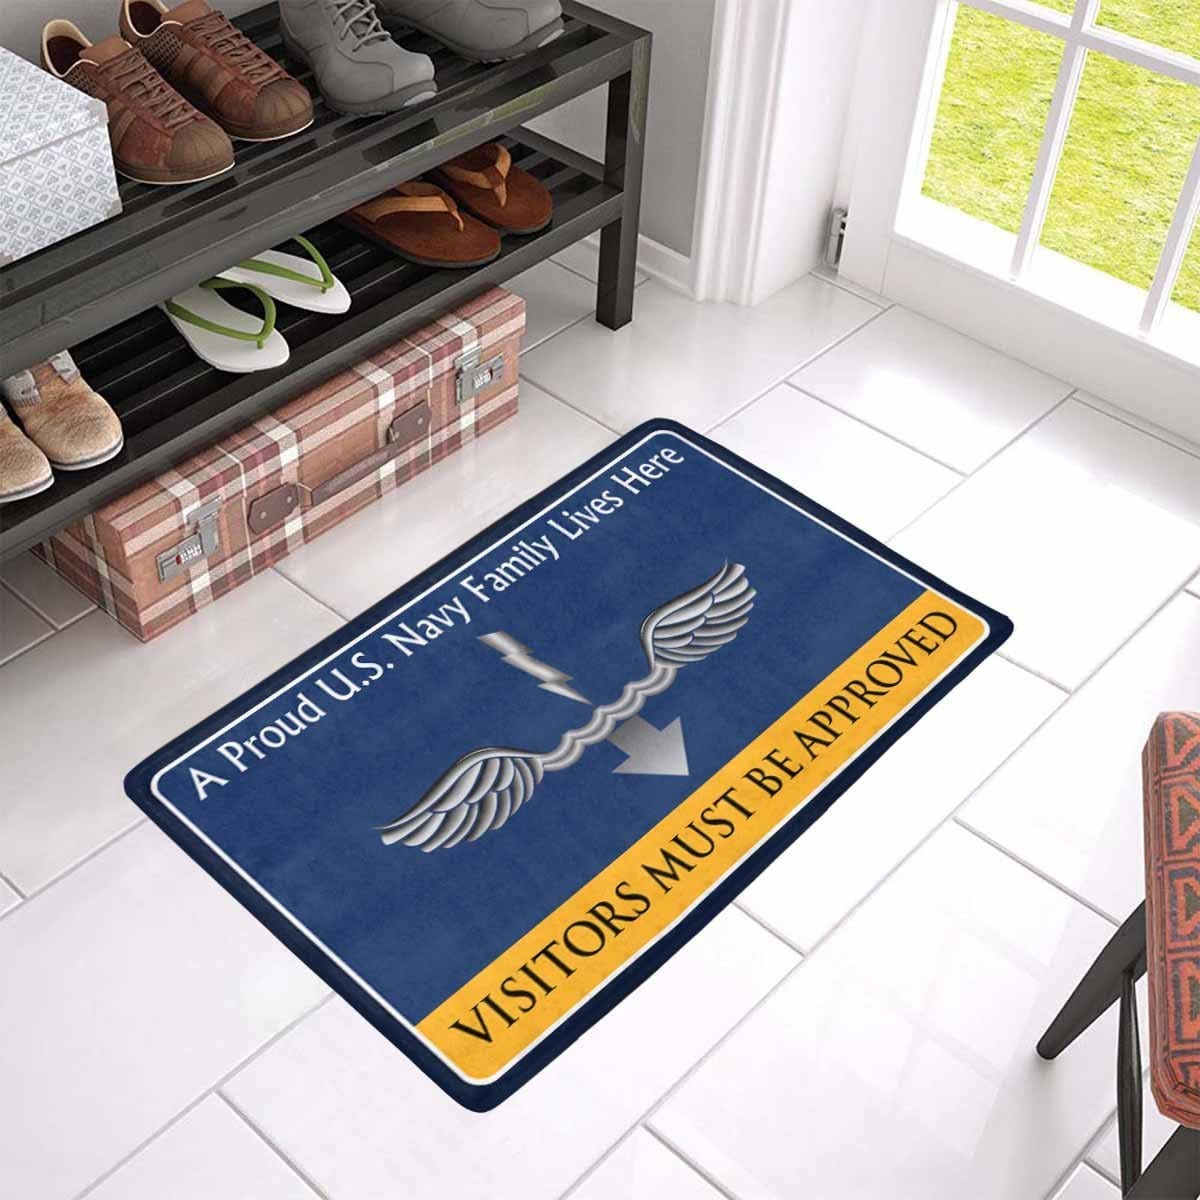 Navy Antisubmarine Warfare Technician Navy AX Family Doormat - Visitors must be approved (23,6 inches x 15,7 inches)-Doormat-Navy-Rate-Veterans Nation